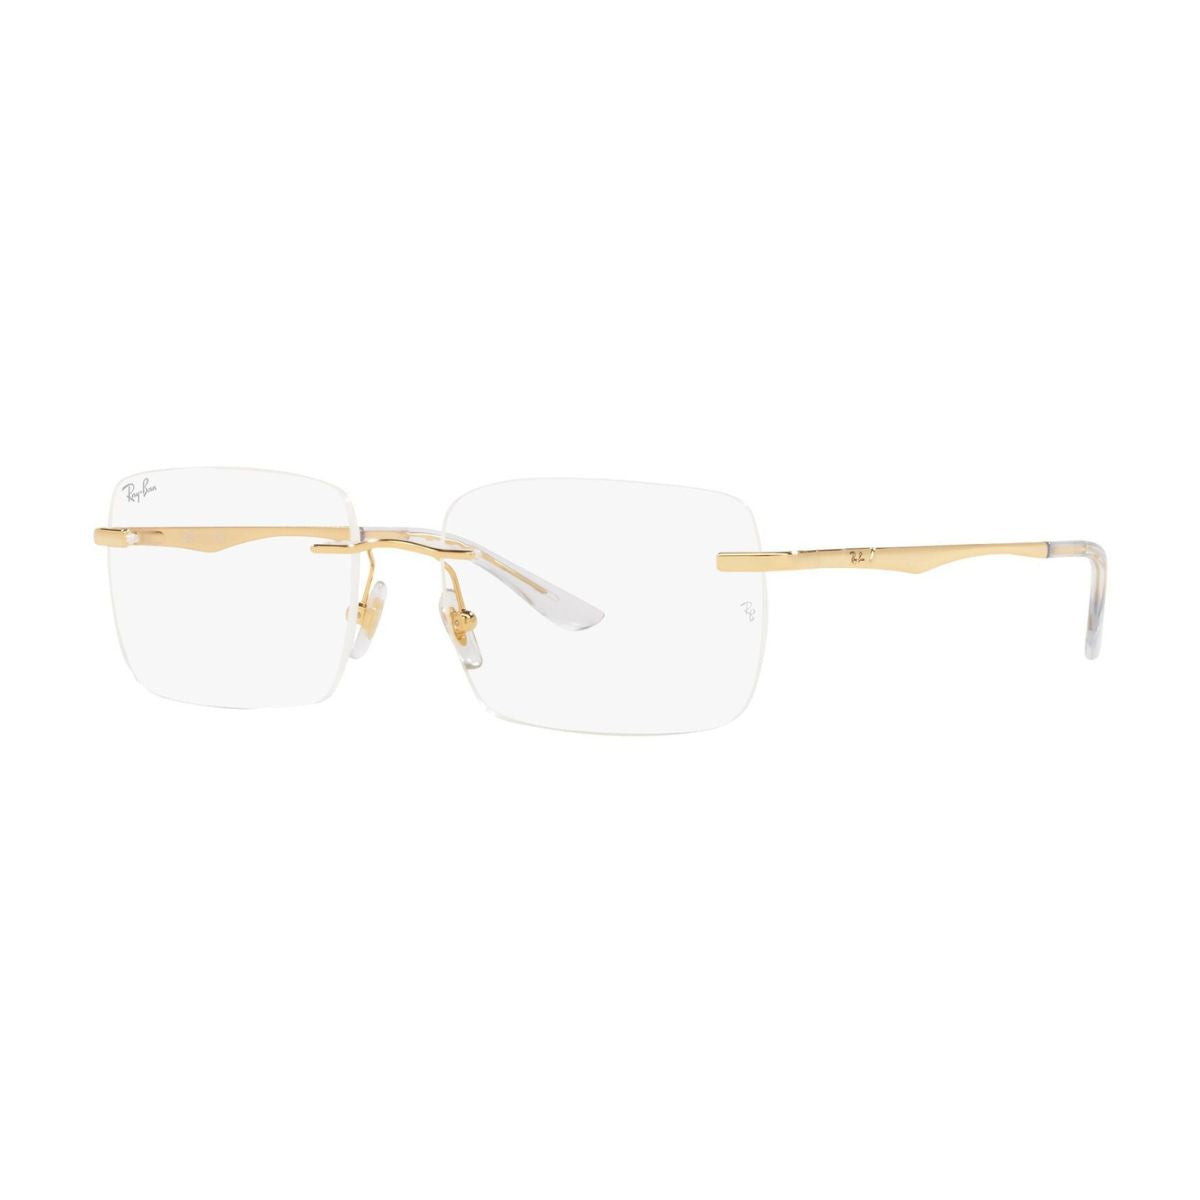 "Rayban 6483I 3127spactacle glass framesfor men and women online at optorium"